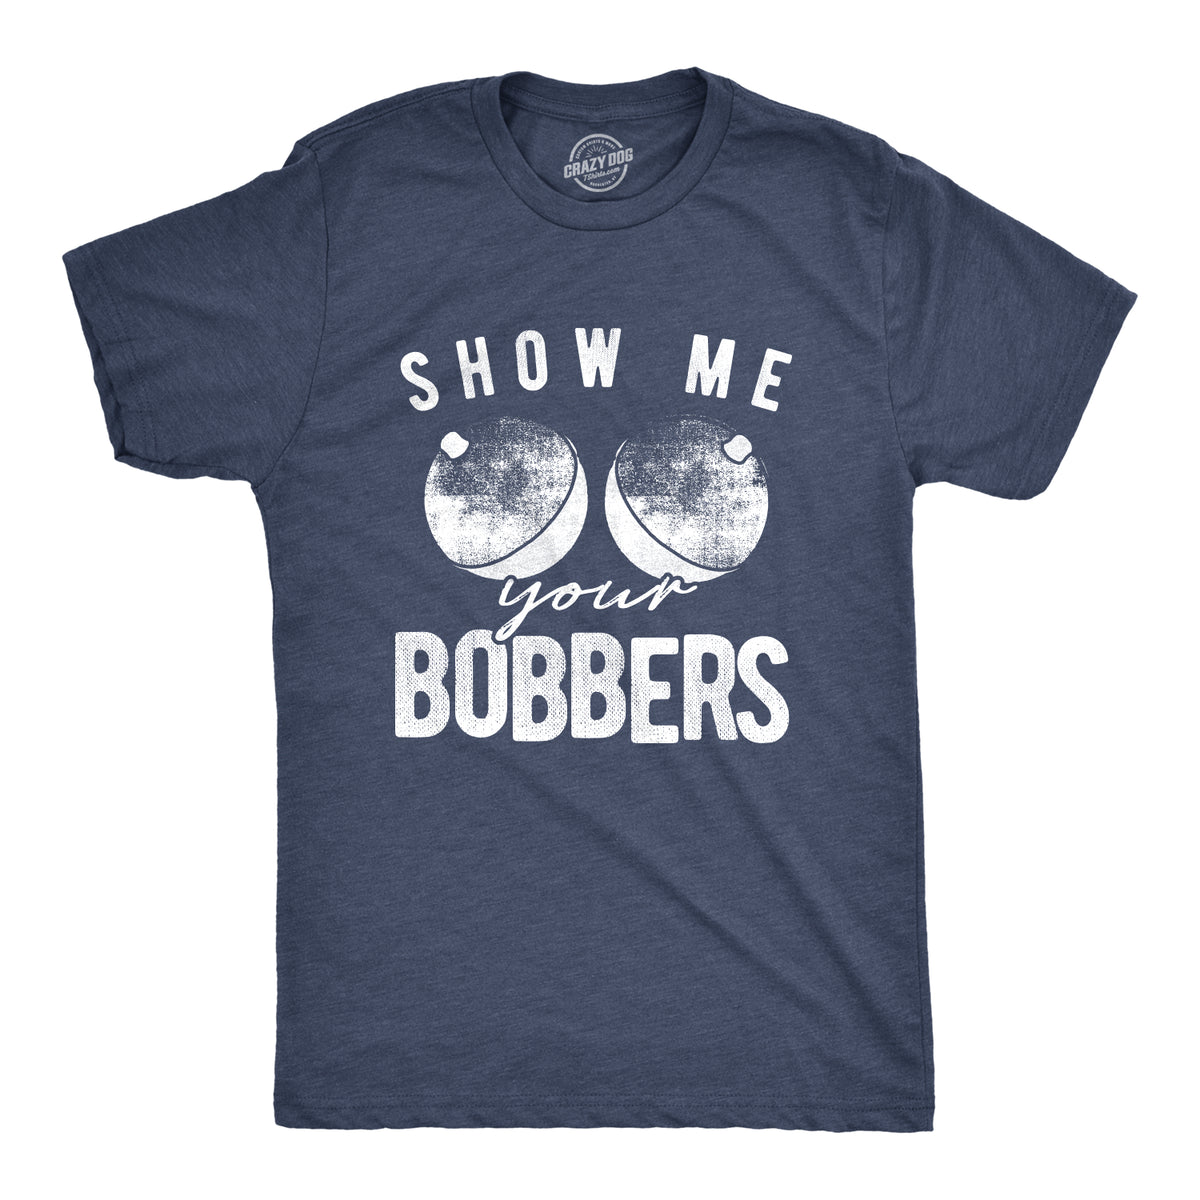 Funny Heather Navy Show Me Your Bobbers Mens T Shirt Nerdy Fishing sex Tee